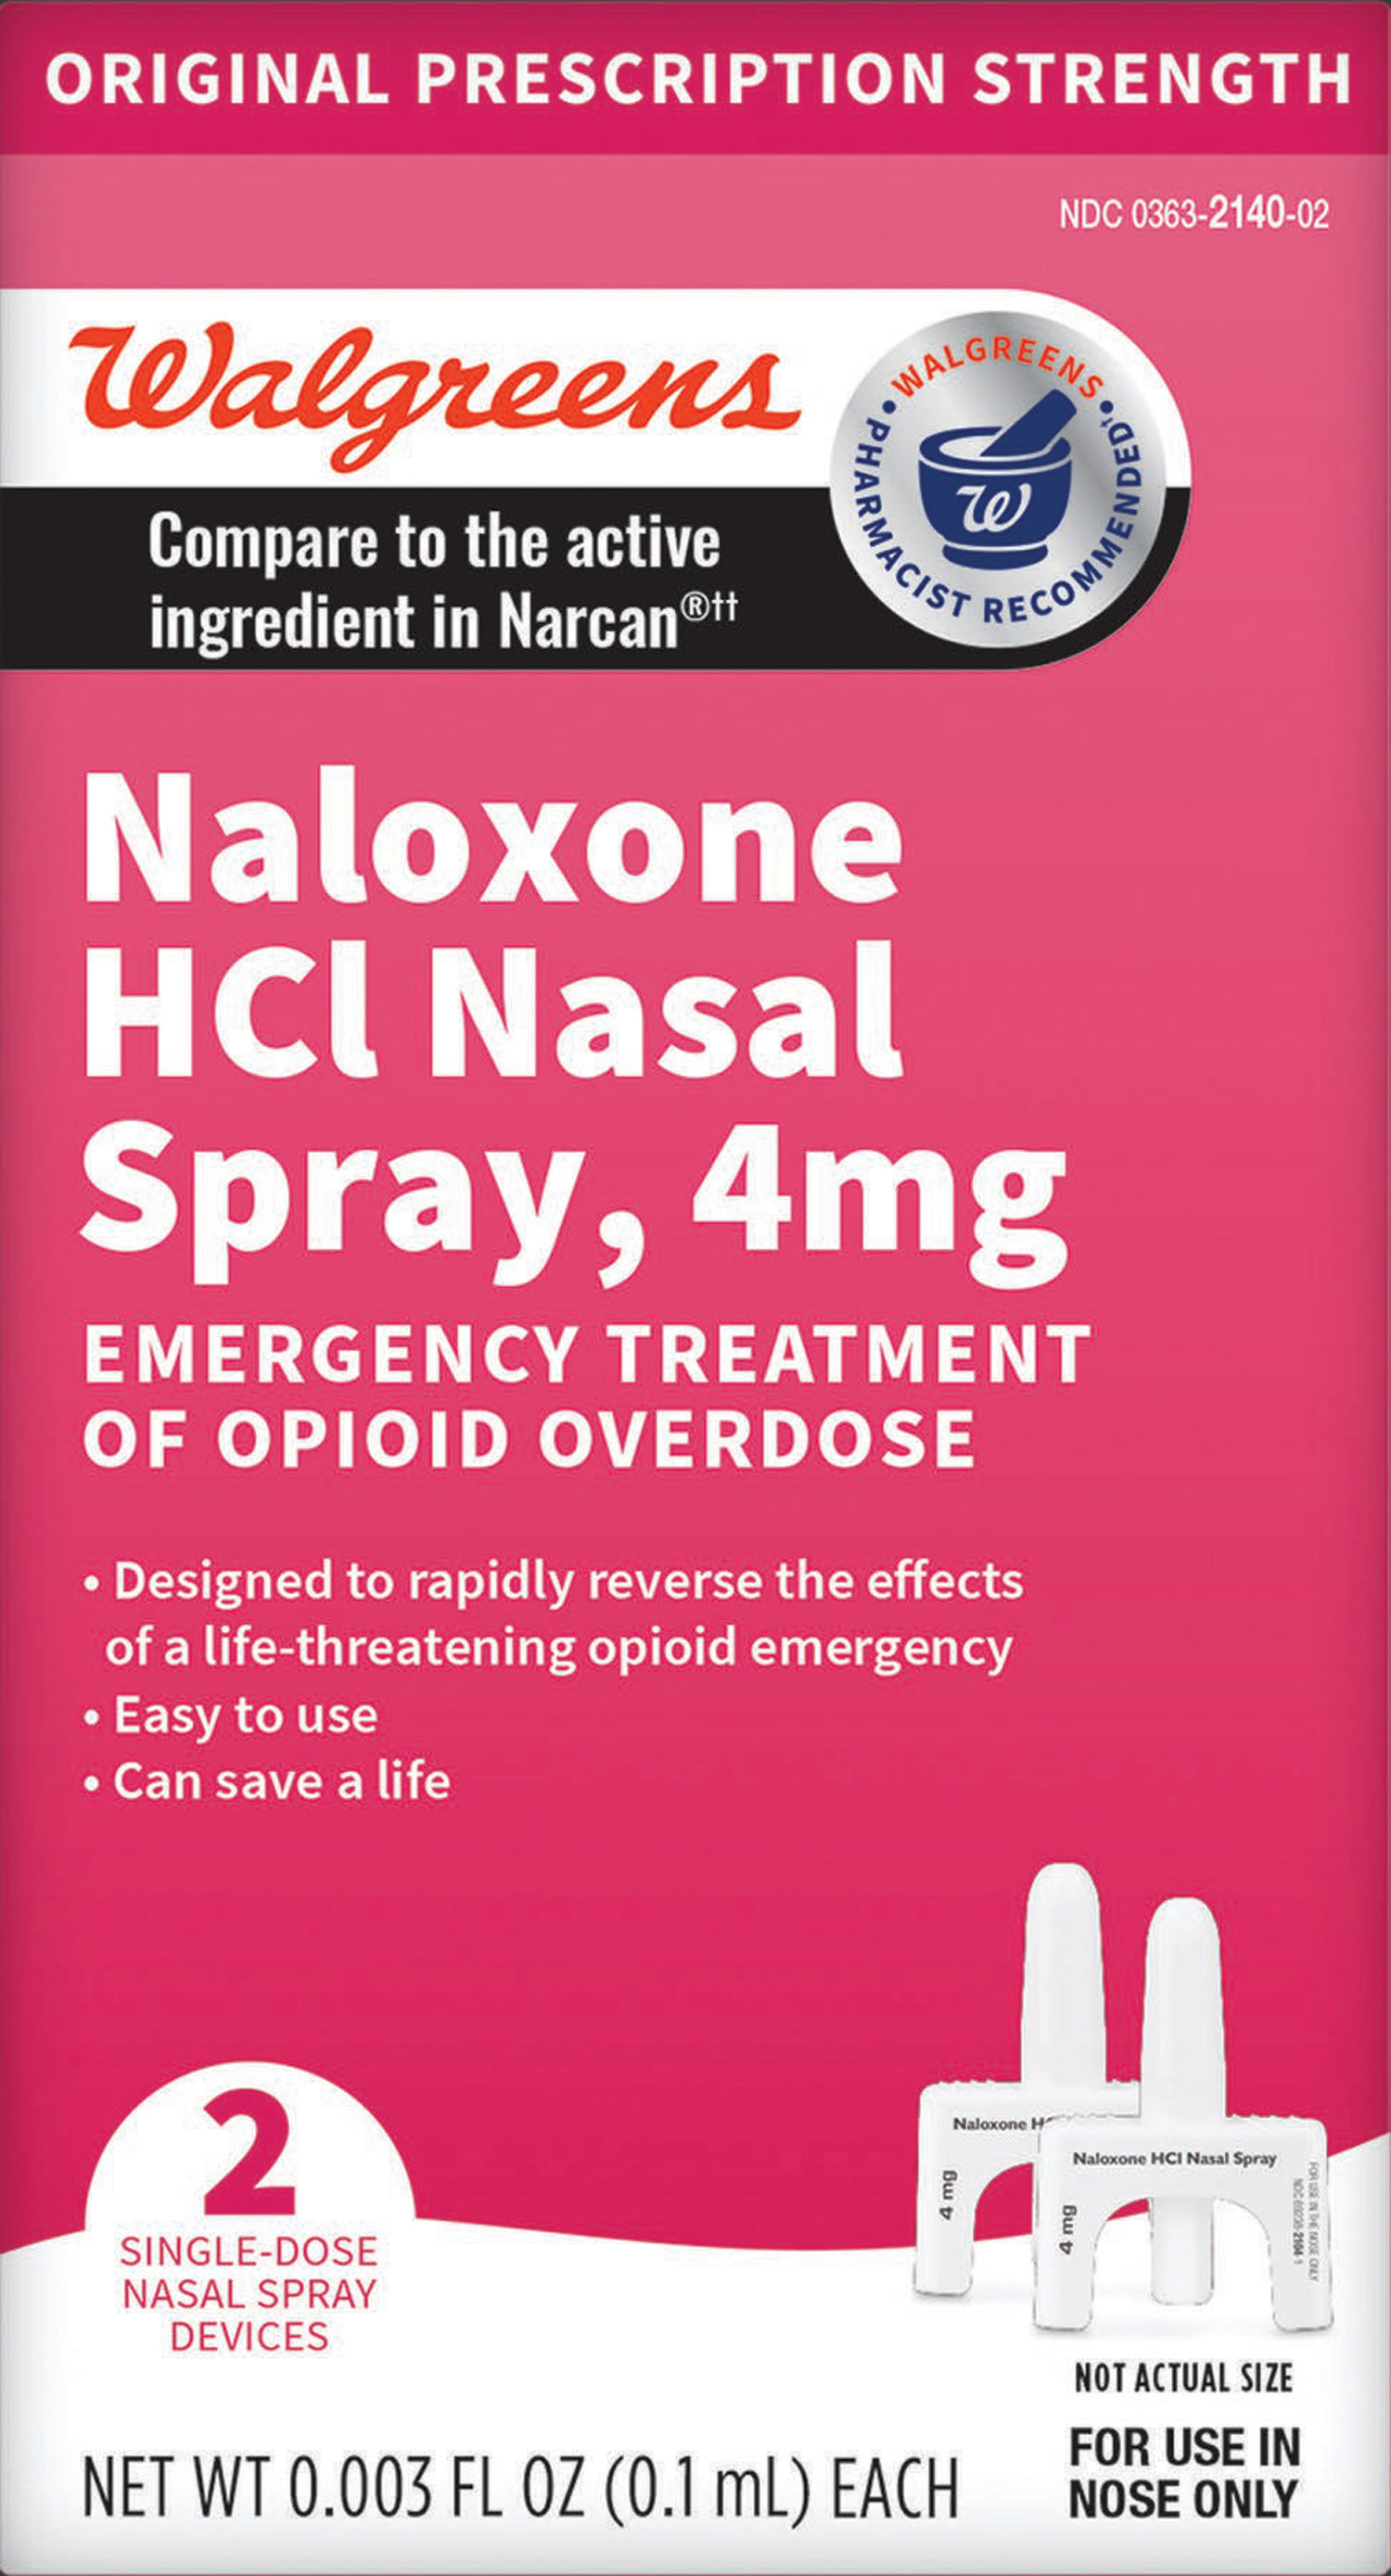 Walgreens is launching a generic version of over-the-counter Narcan